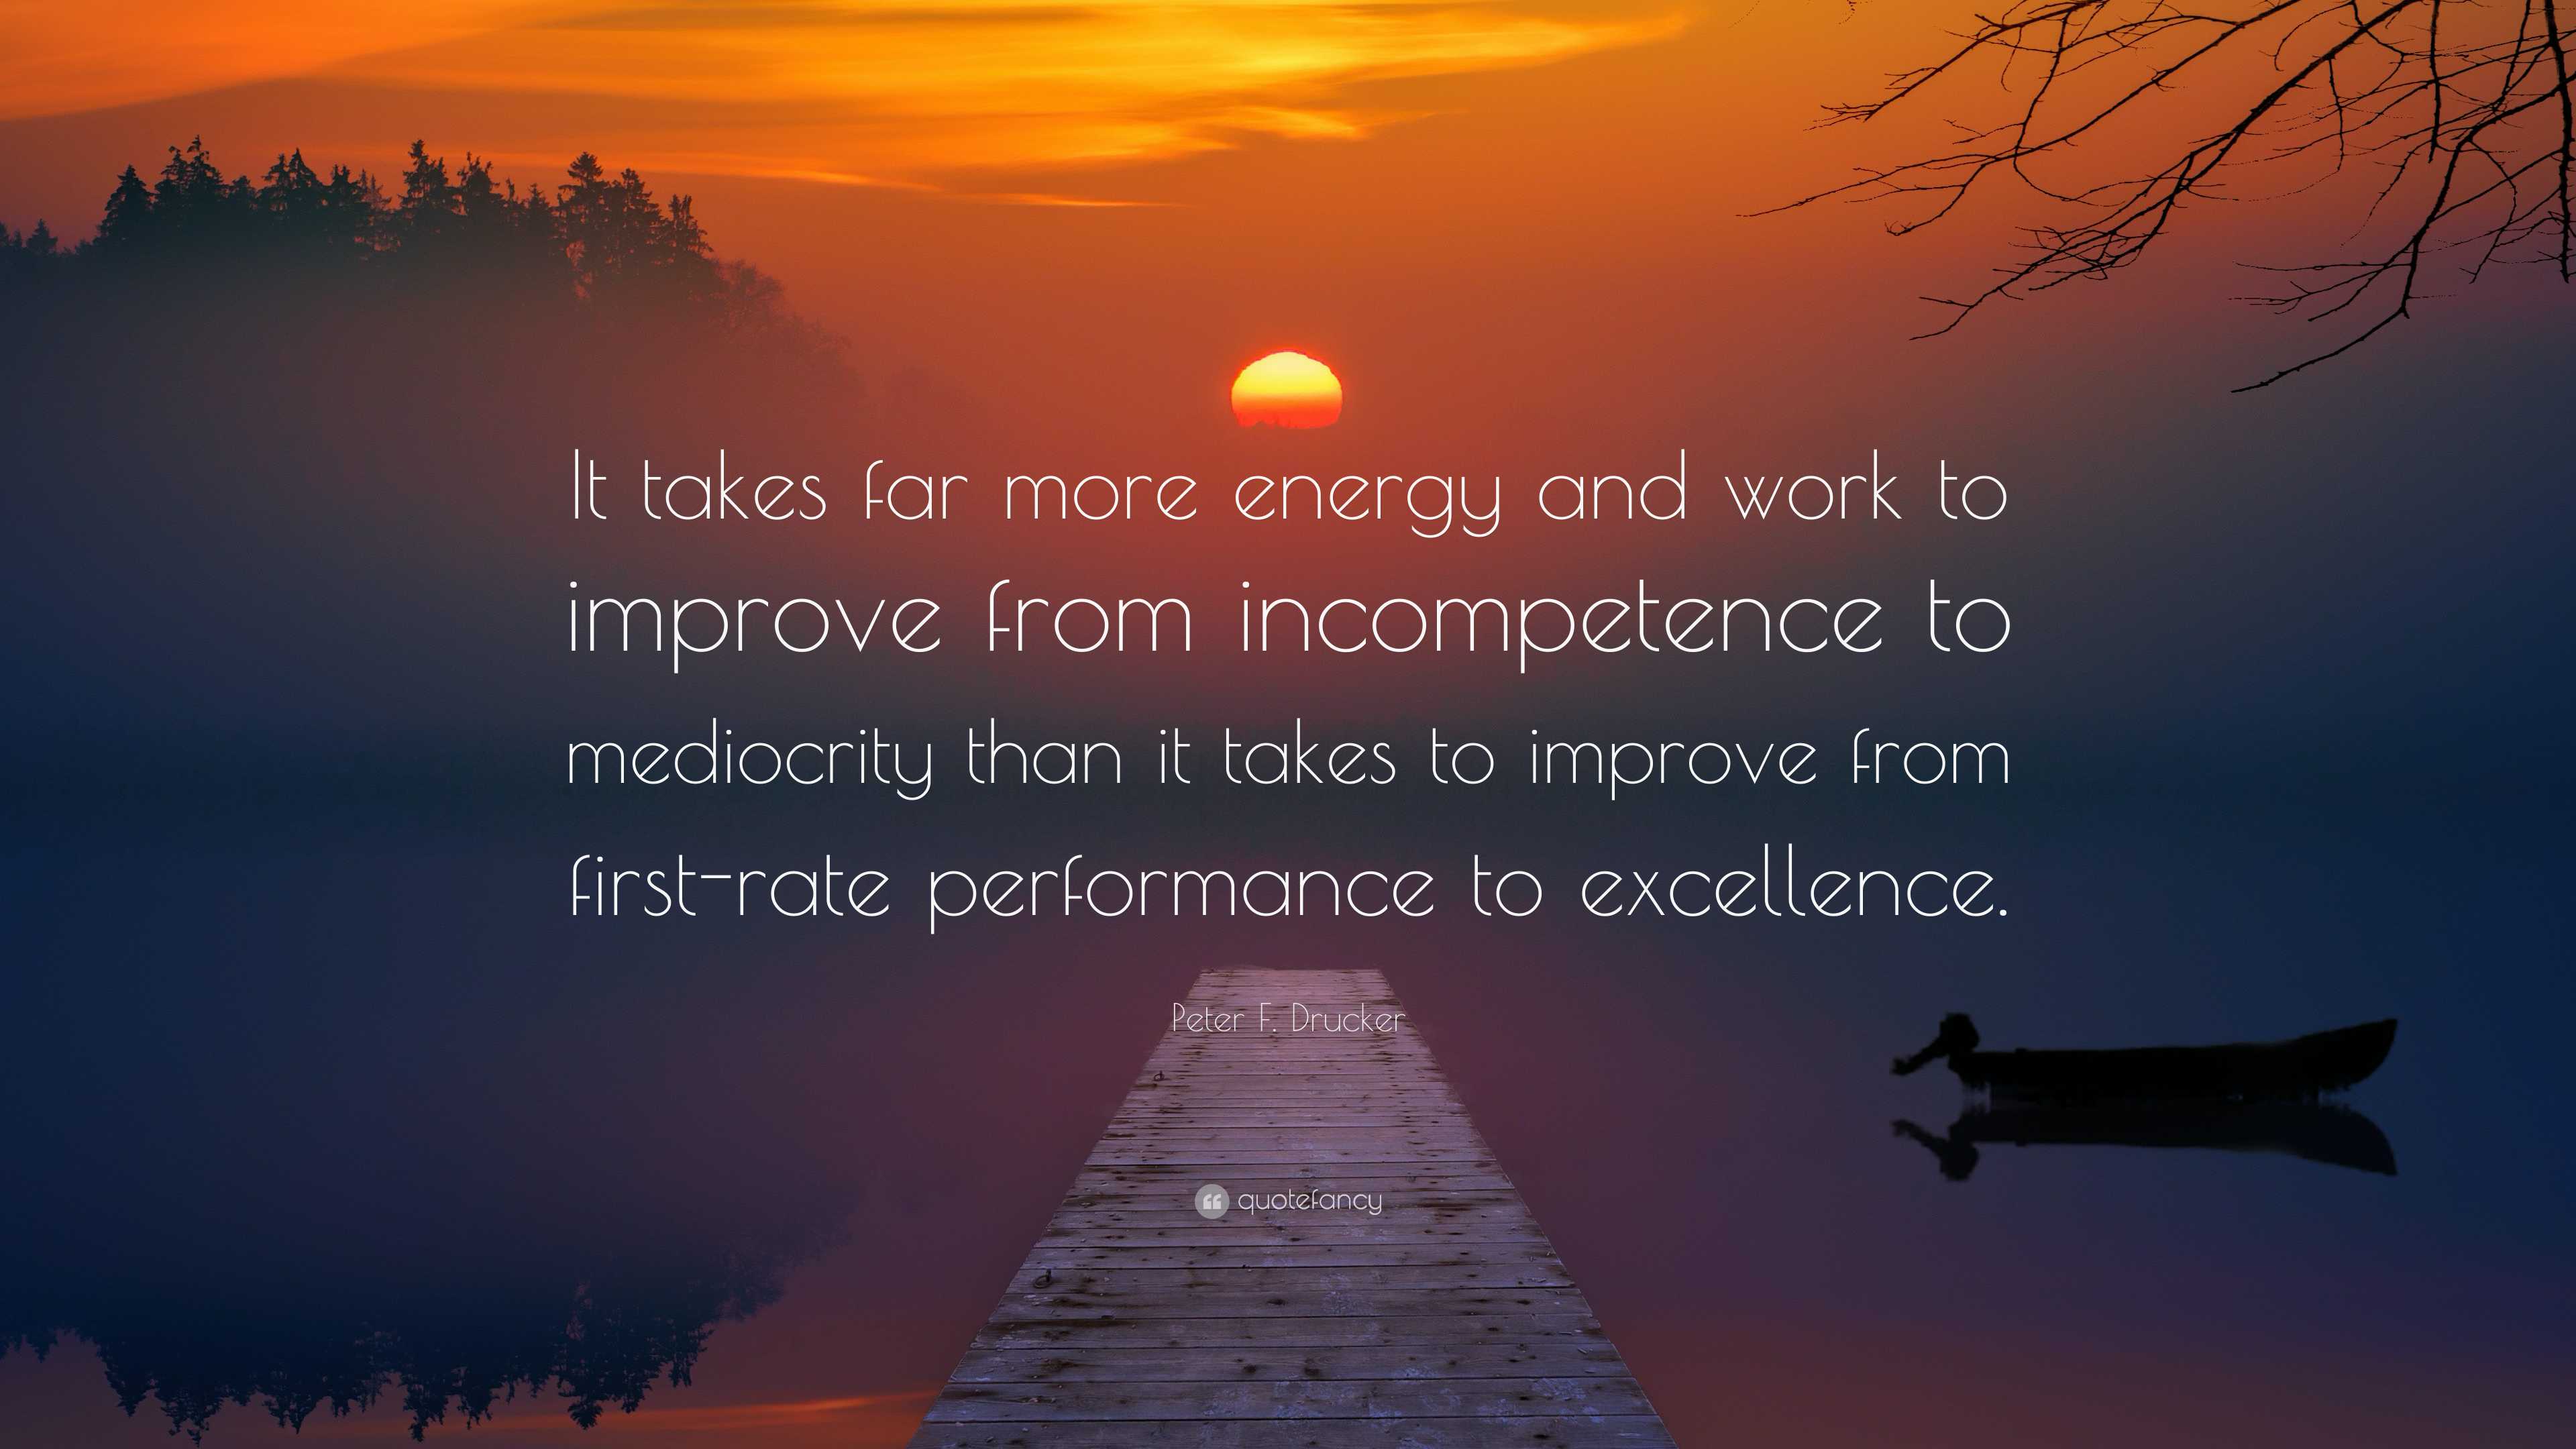 Peter F. Drucker Quote: “It takes far more energy and work to improve ...